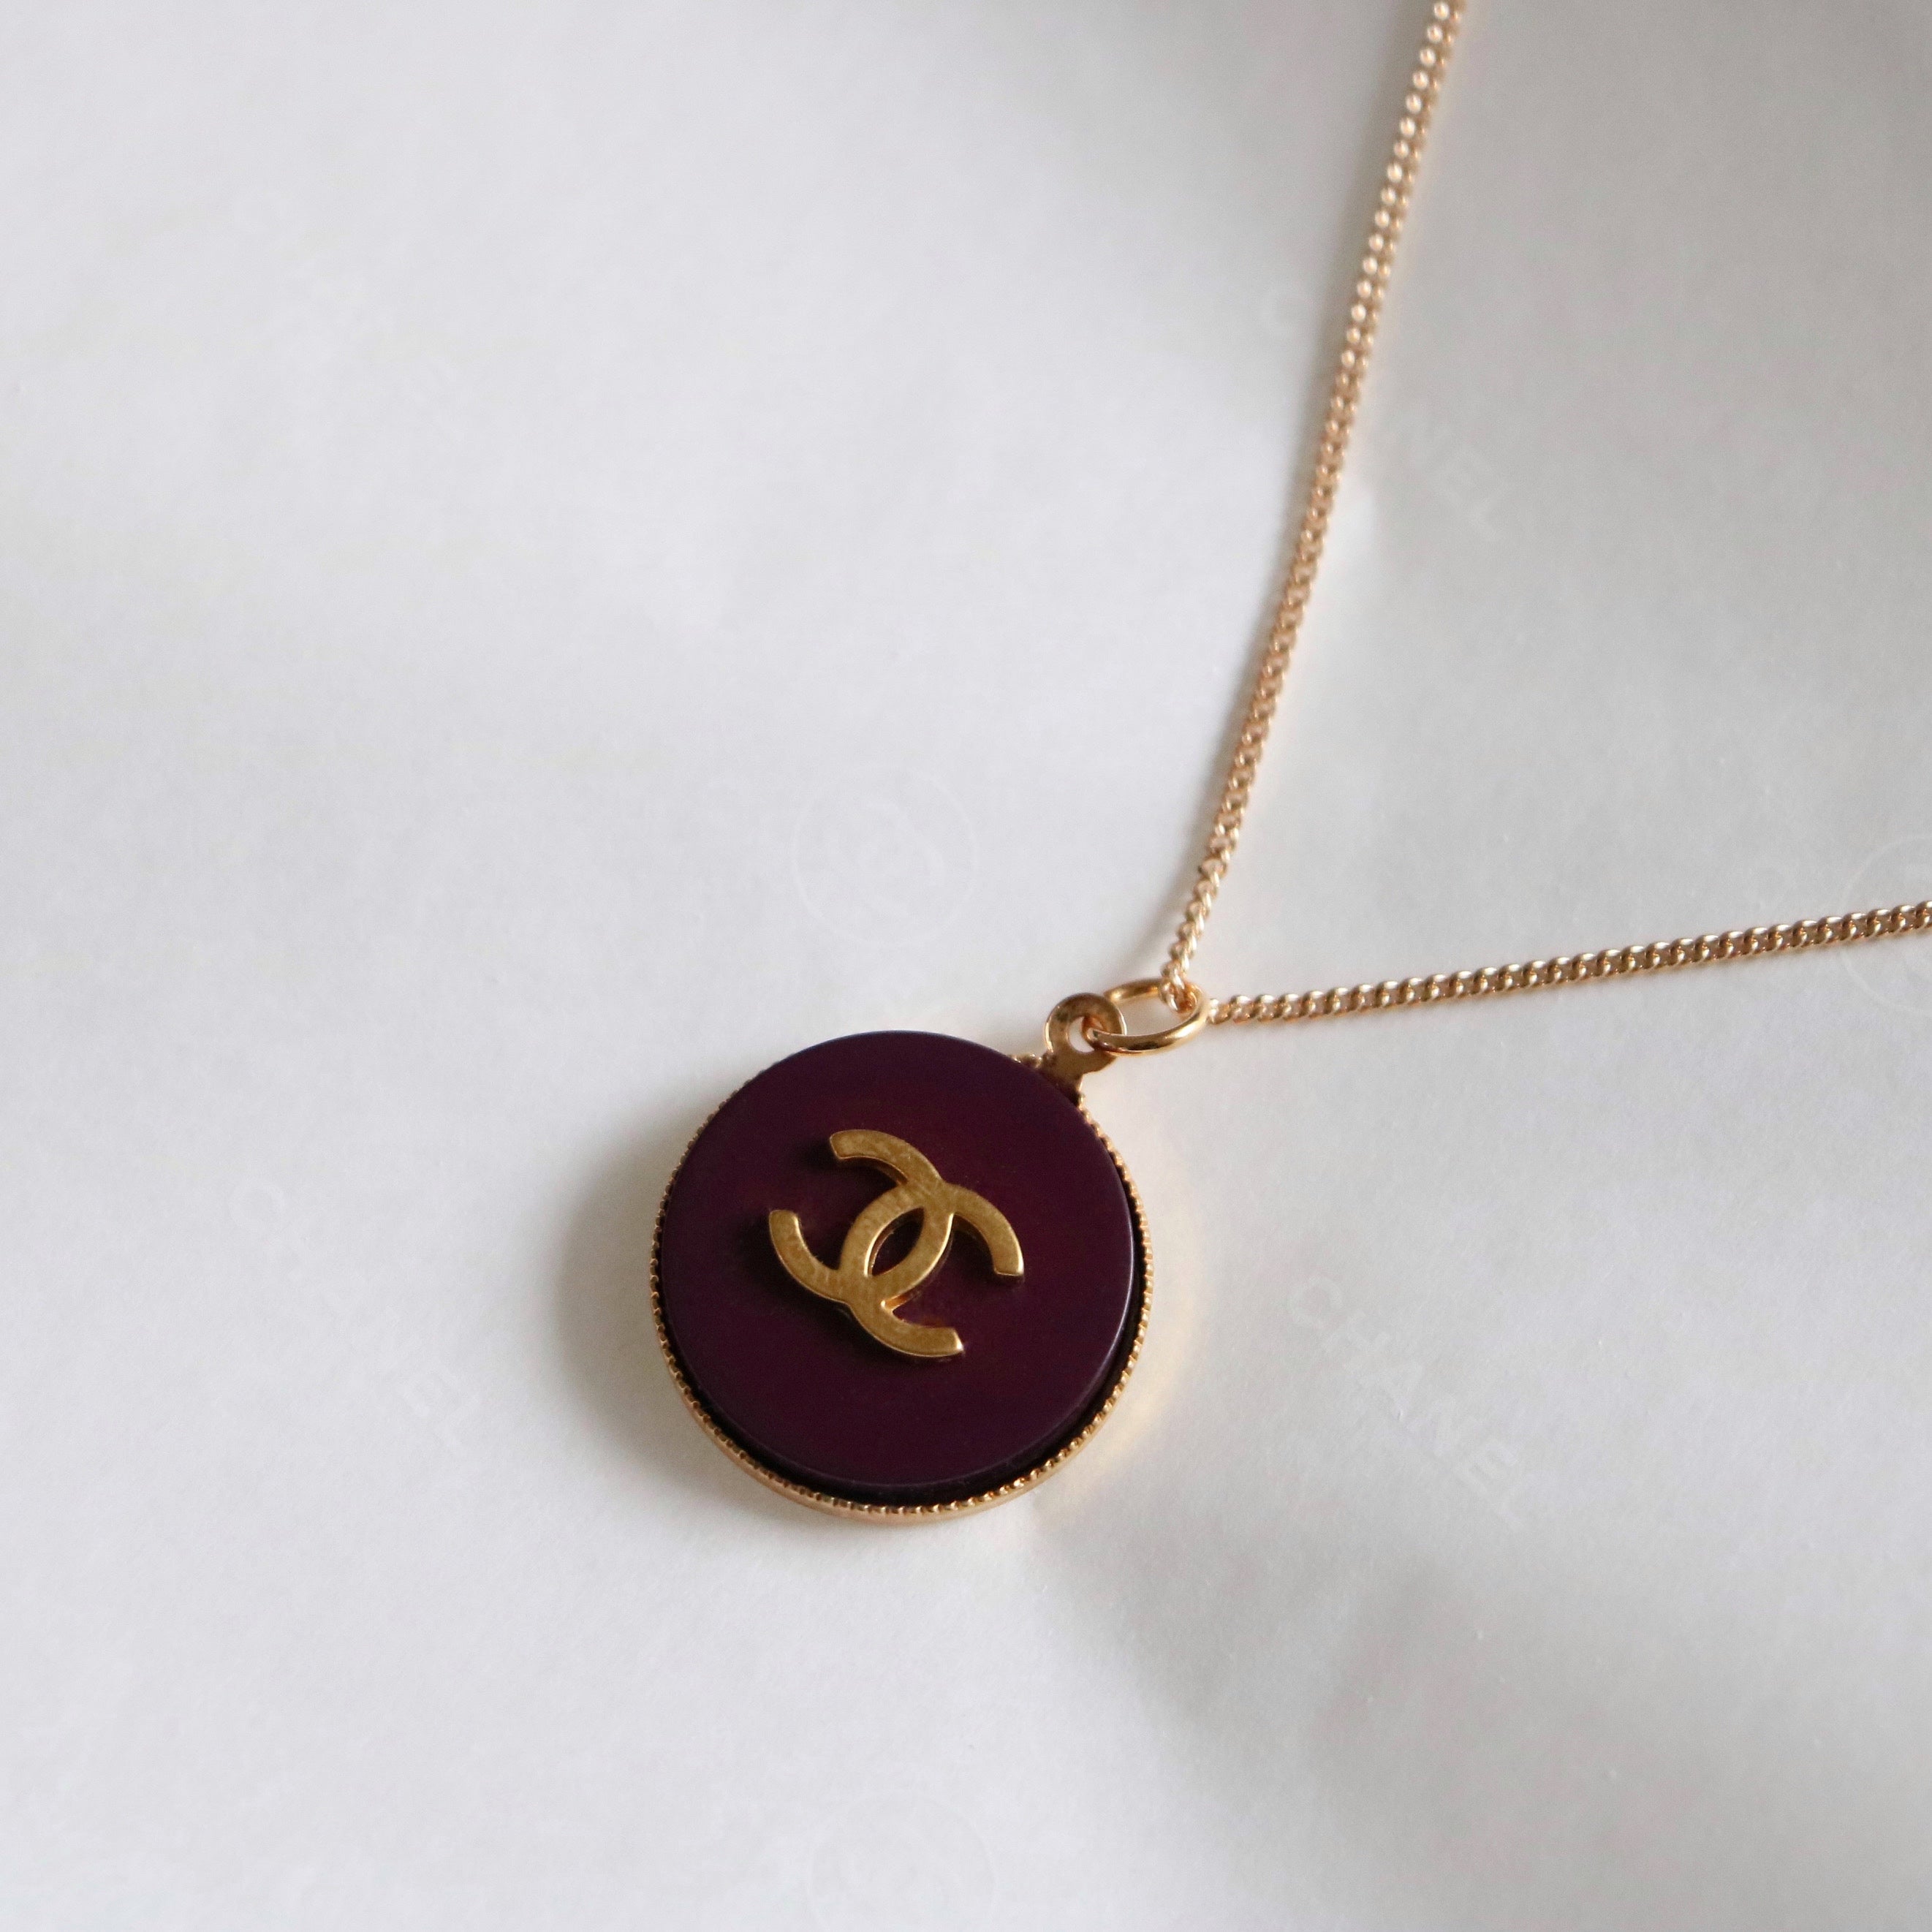 COLLIER UPCYCLÉ CHANEL | PRUNE RARE